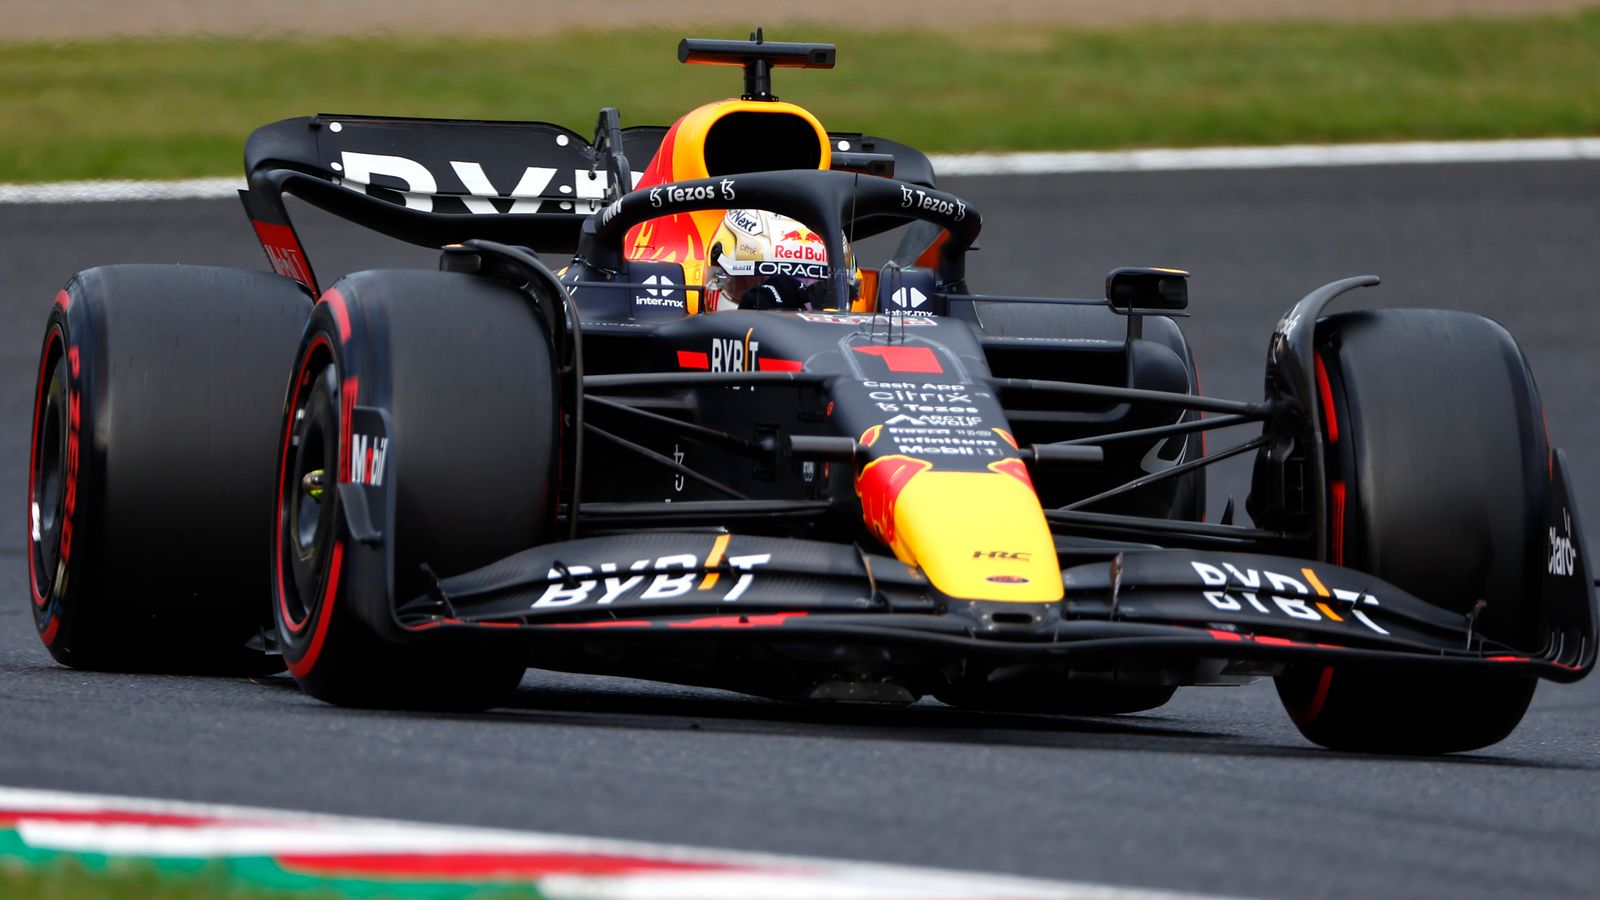 Japanese GP Qualifying: Max Verstappen takes pole position but faces investigation for Lando Norris incident